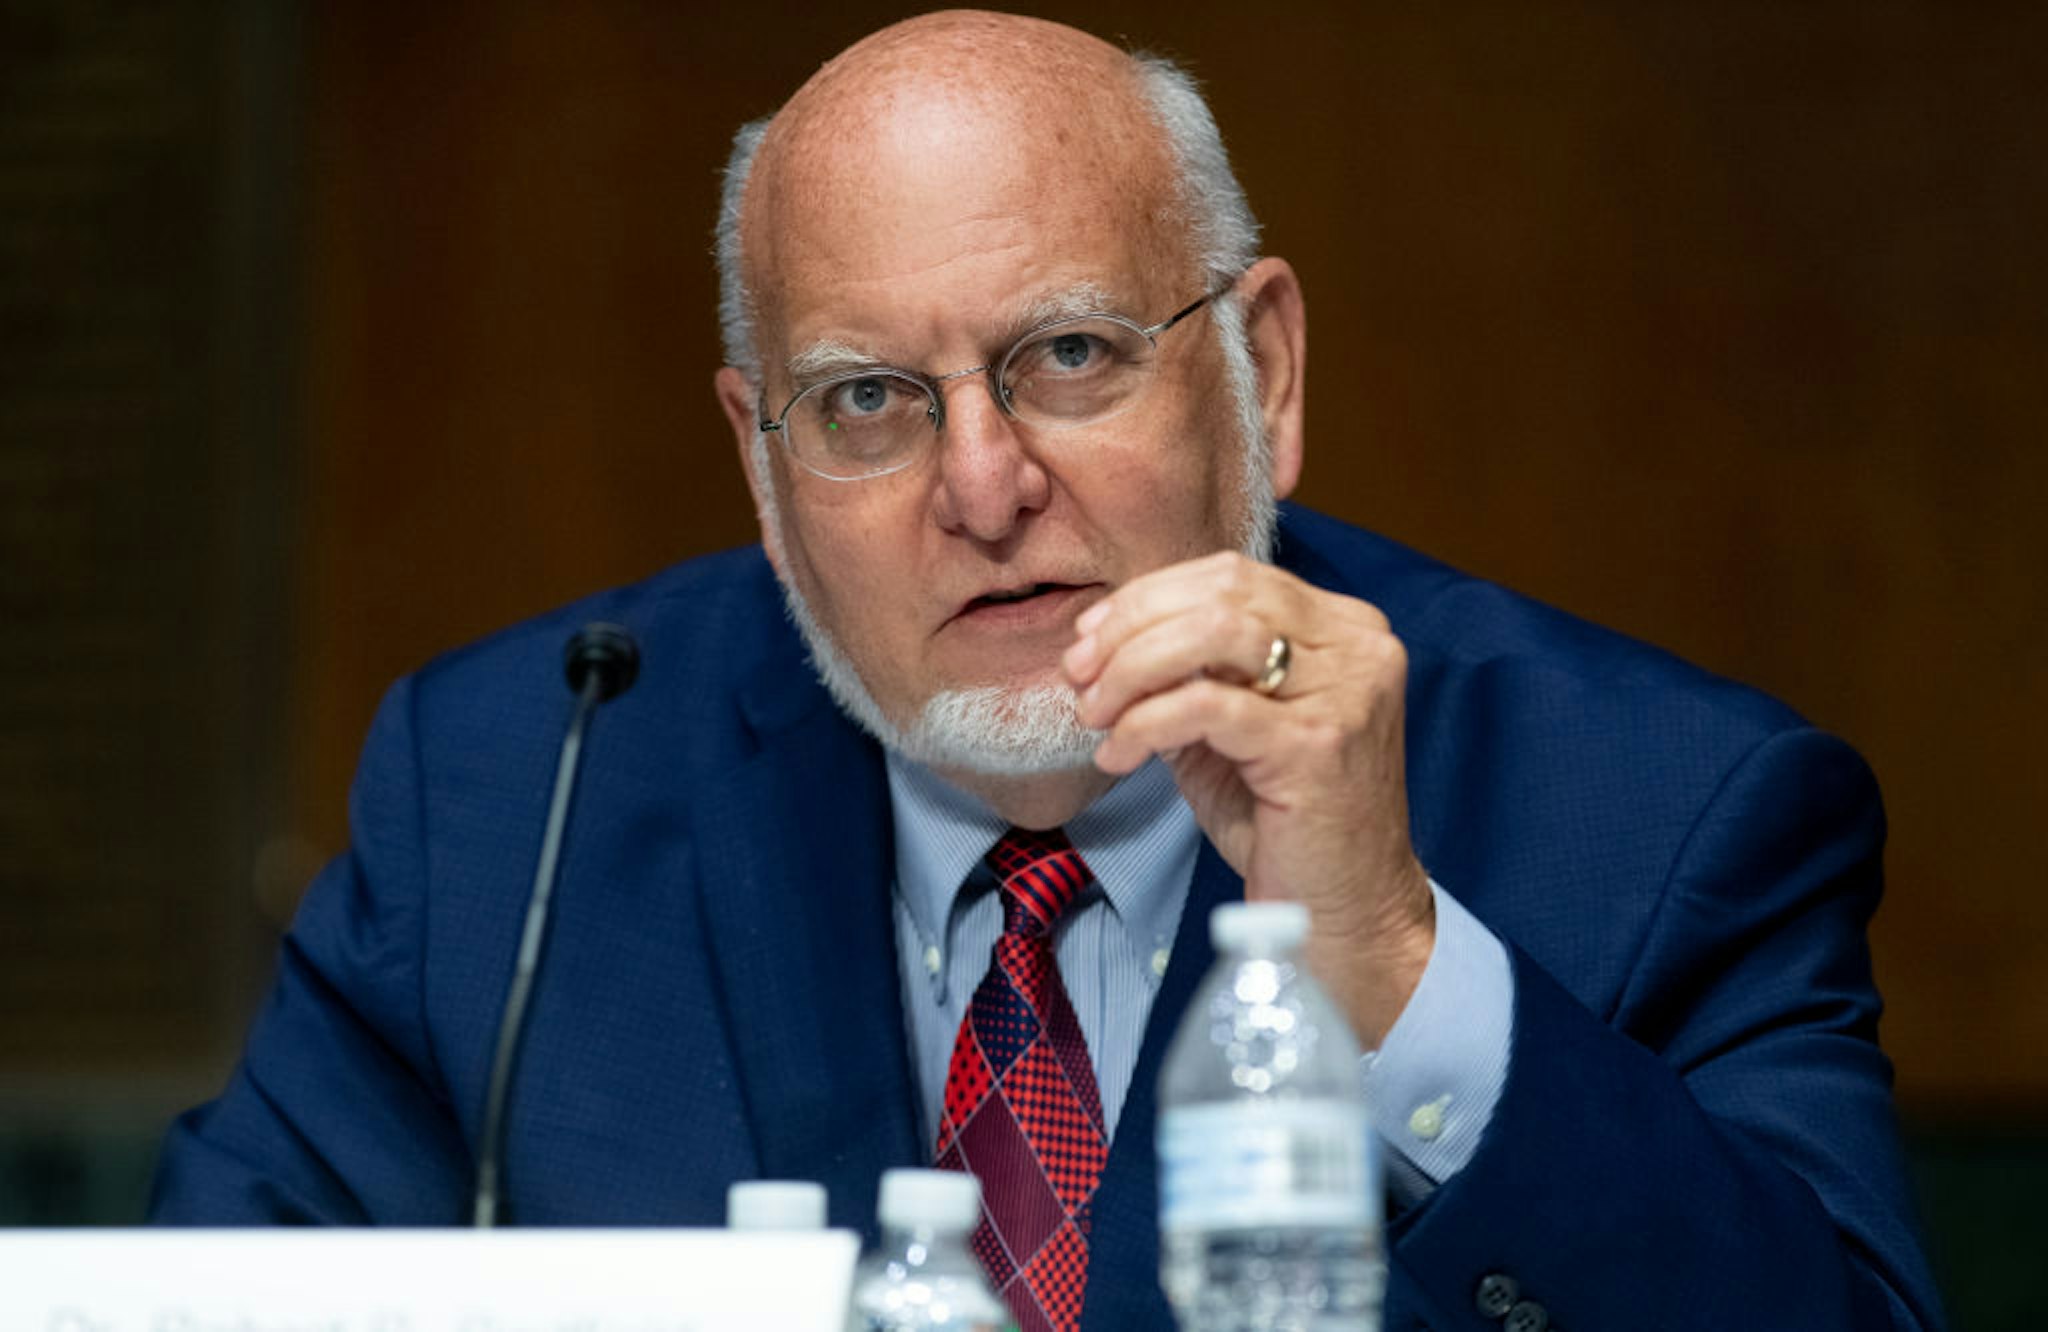 Robert Redfield, director of the Centers for Disease Control and Prevention (CDC), speaks during a Senate Appropriations Subcommittee hearing in Washington, D.C., U.S., on Thursday, July 2, 2020.